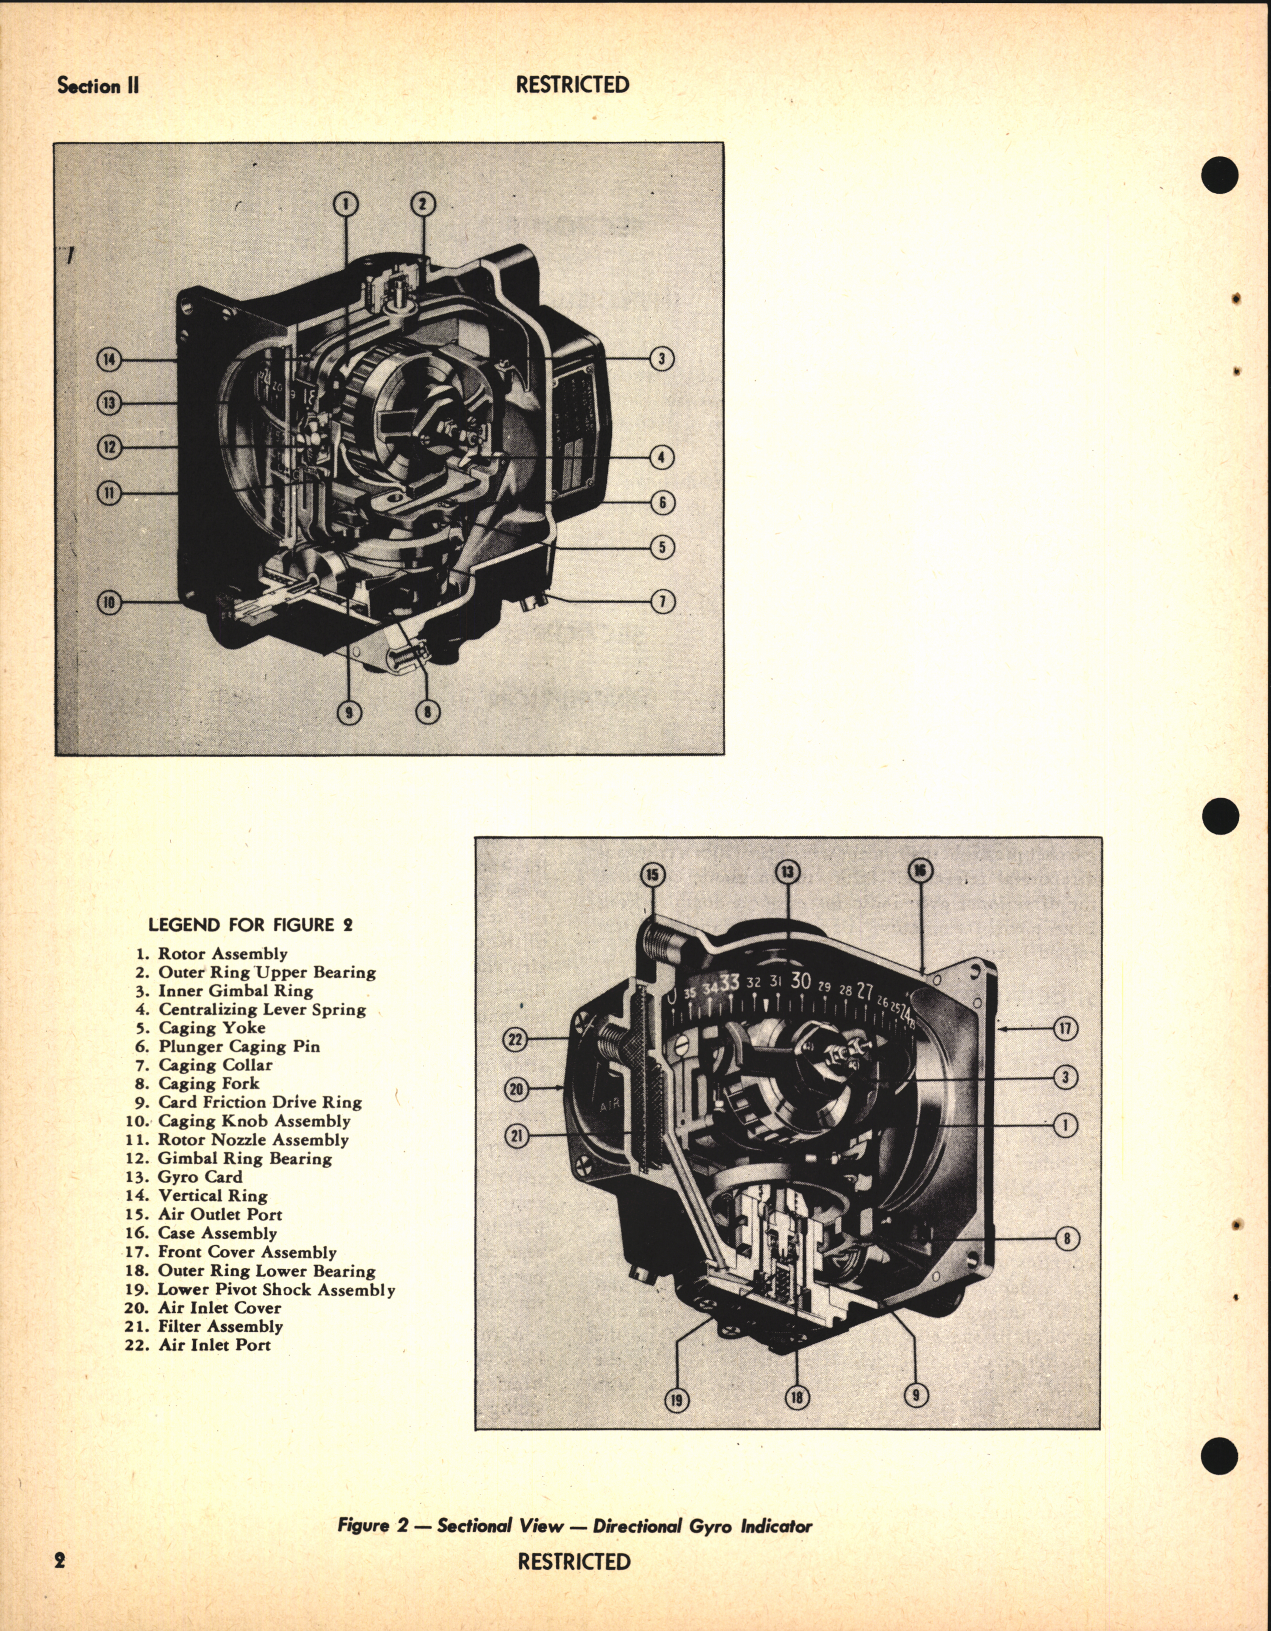 Sample page 8 from AirCorps Library document: Handbook of Instructions with Parts Catalog for Directional Gyro Indicator AN 5735-1, JH 5500 and JH 5500-A